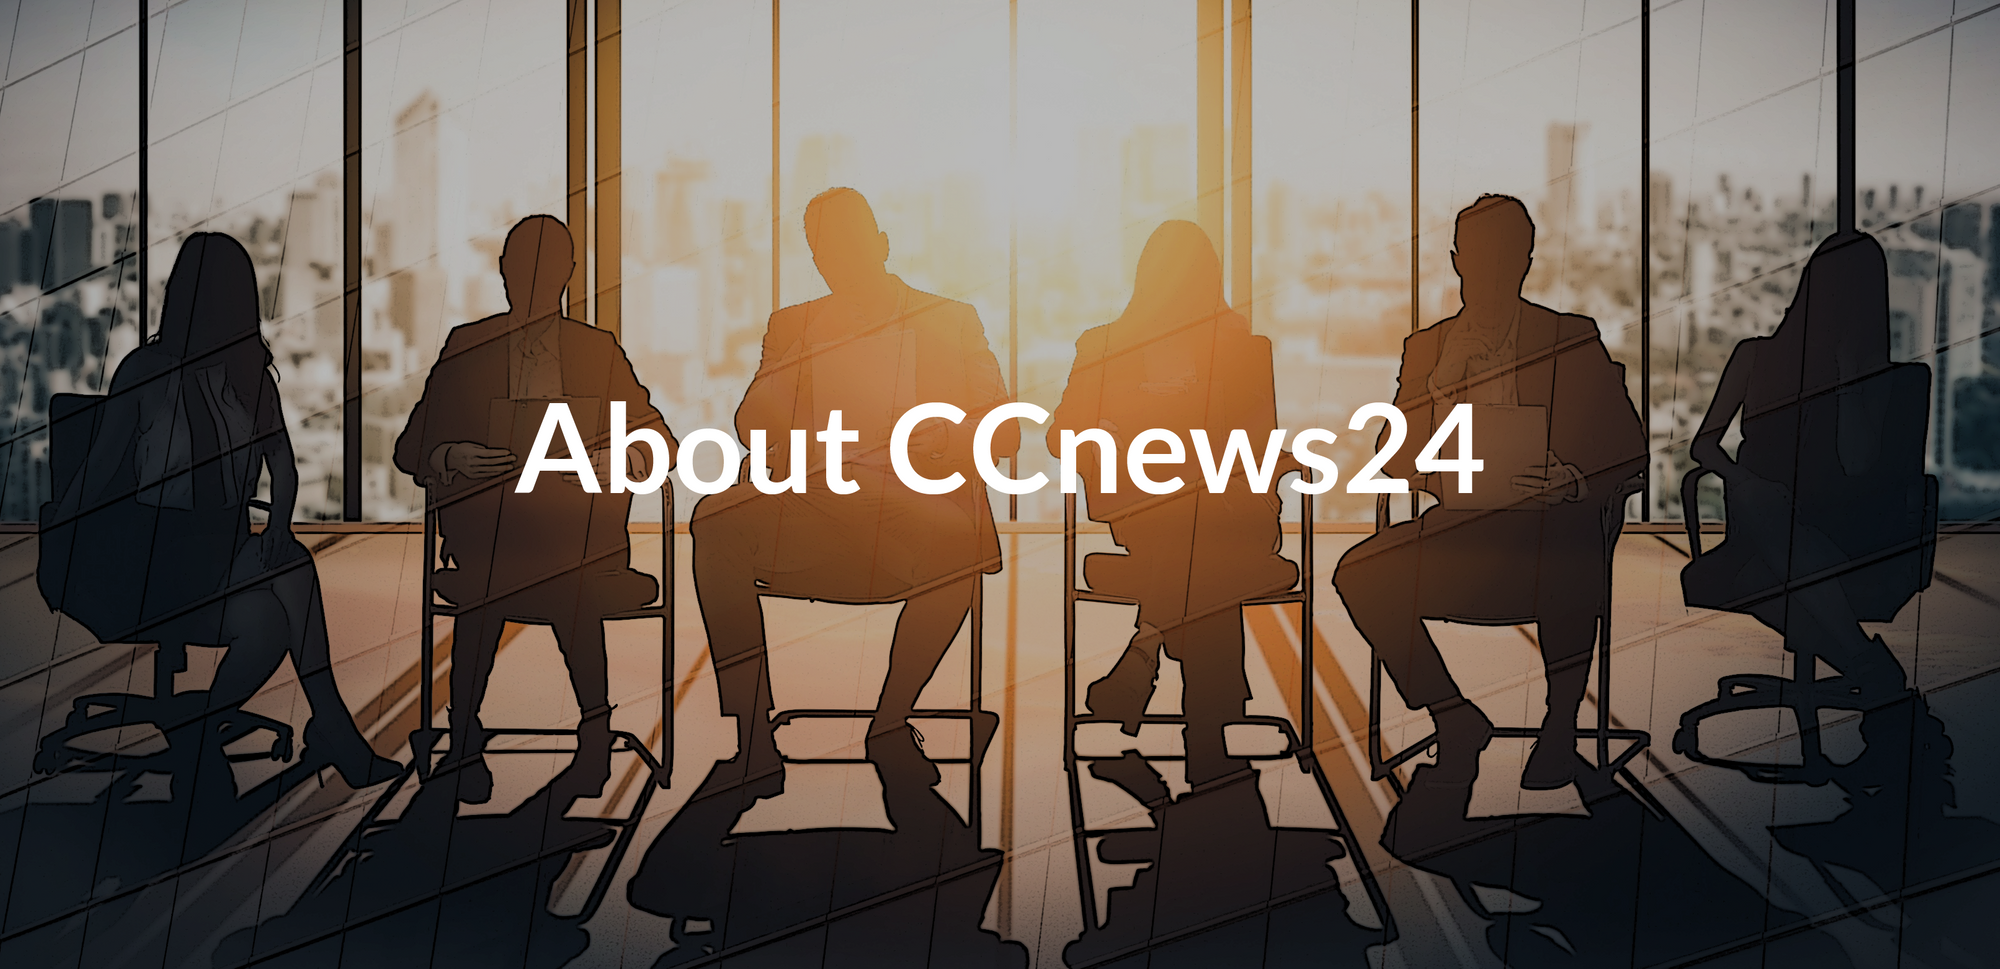 About CCnews24